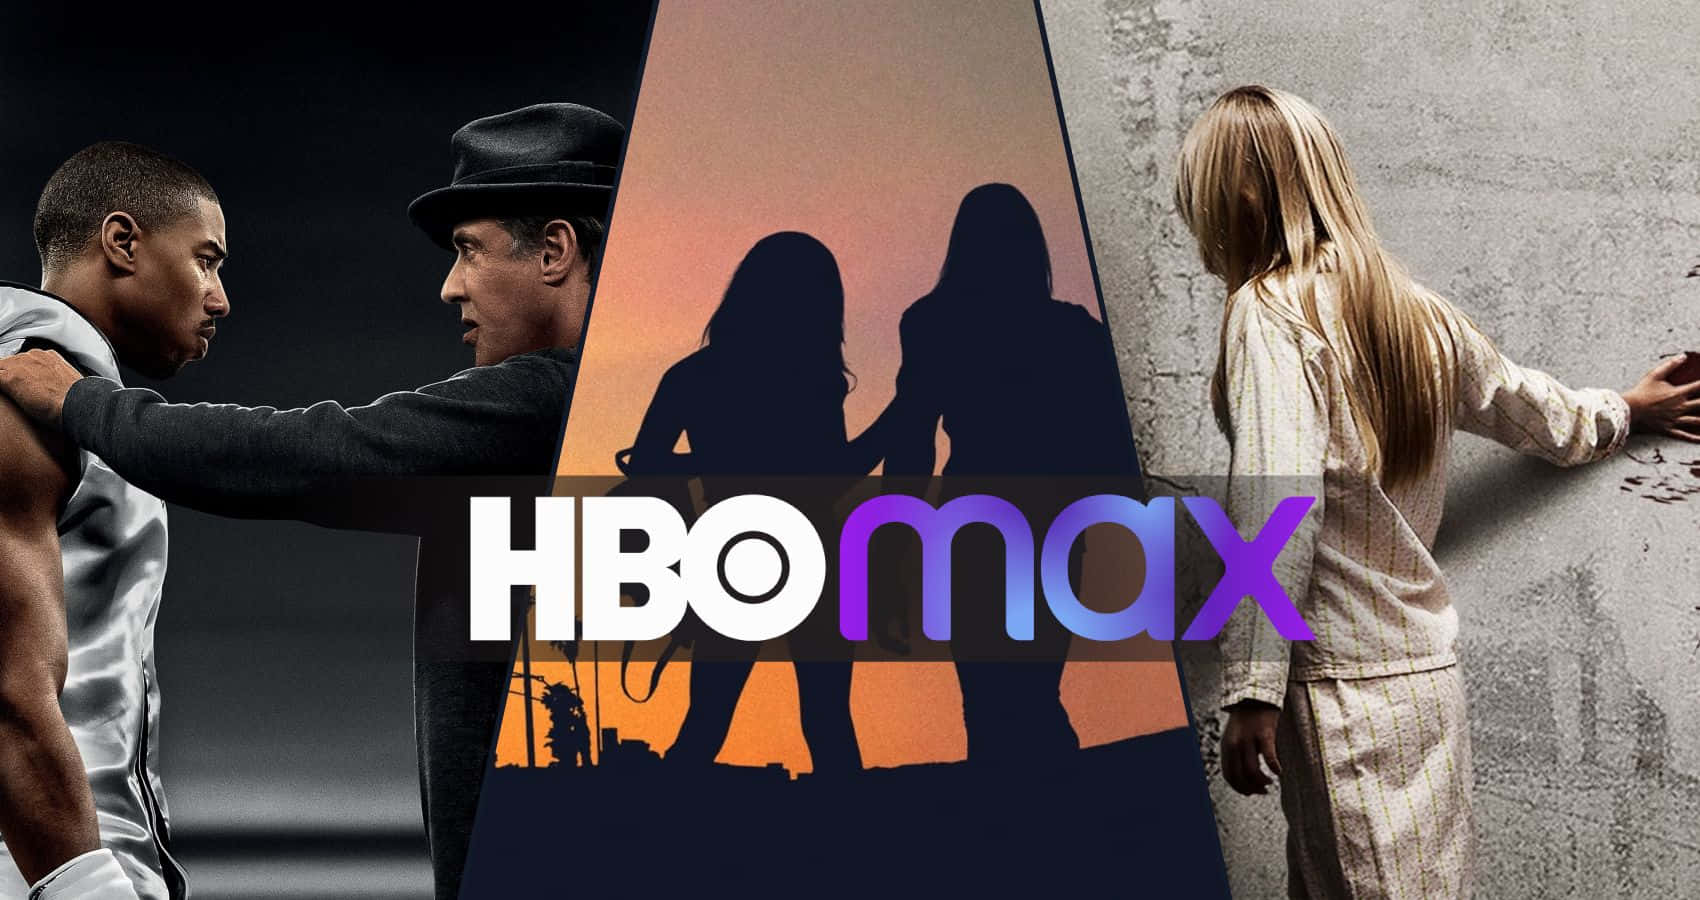 'Escape to a world of adventure and entertainment with HBO'